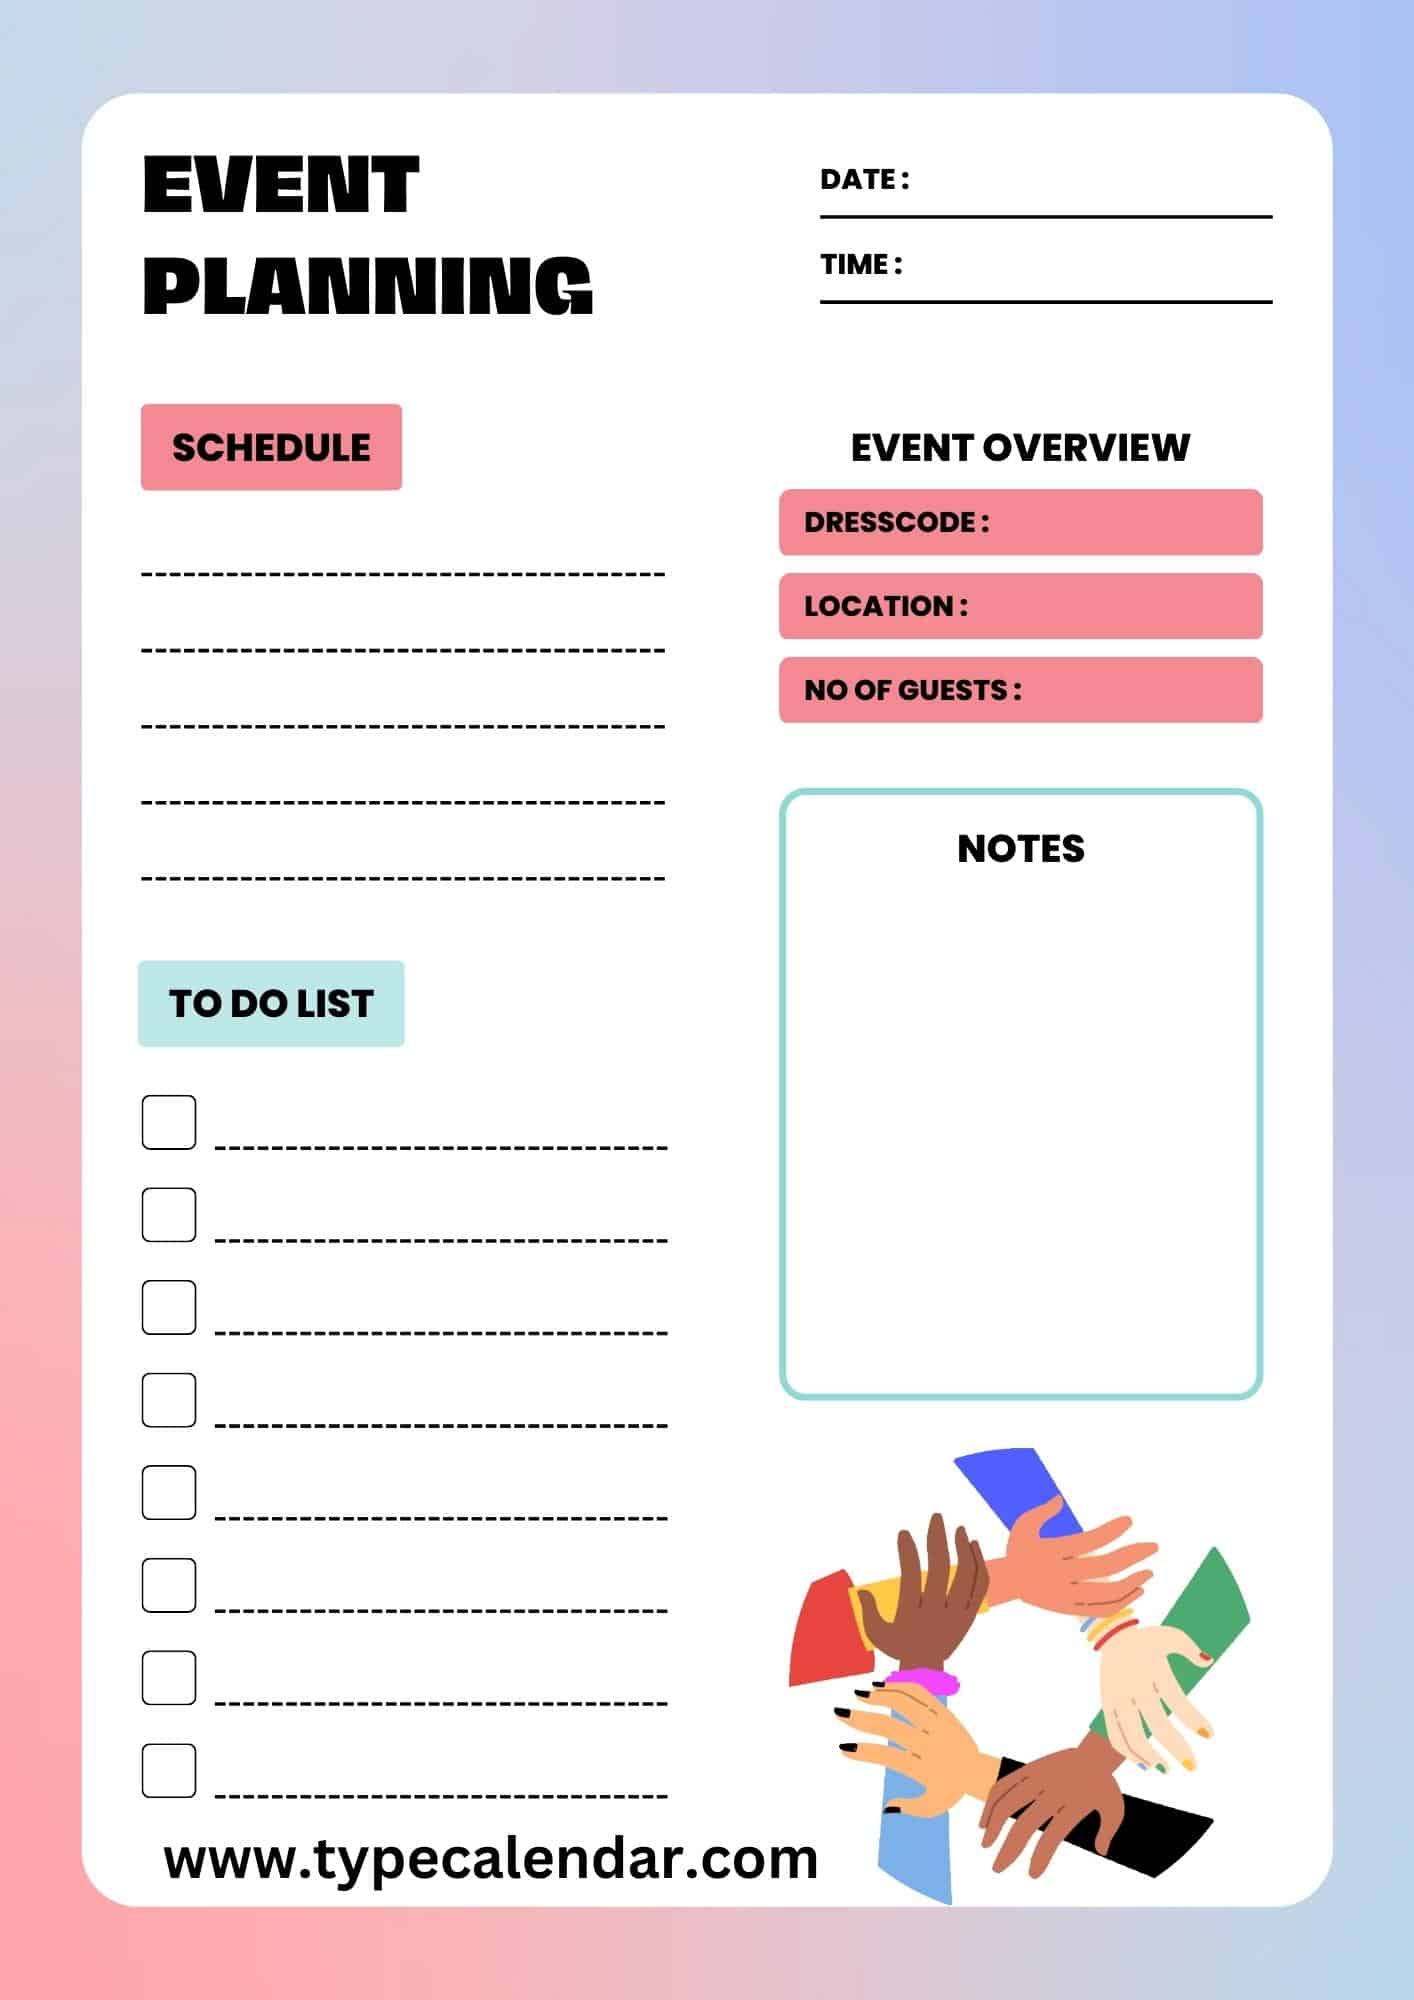 What Do Event Planners Make